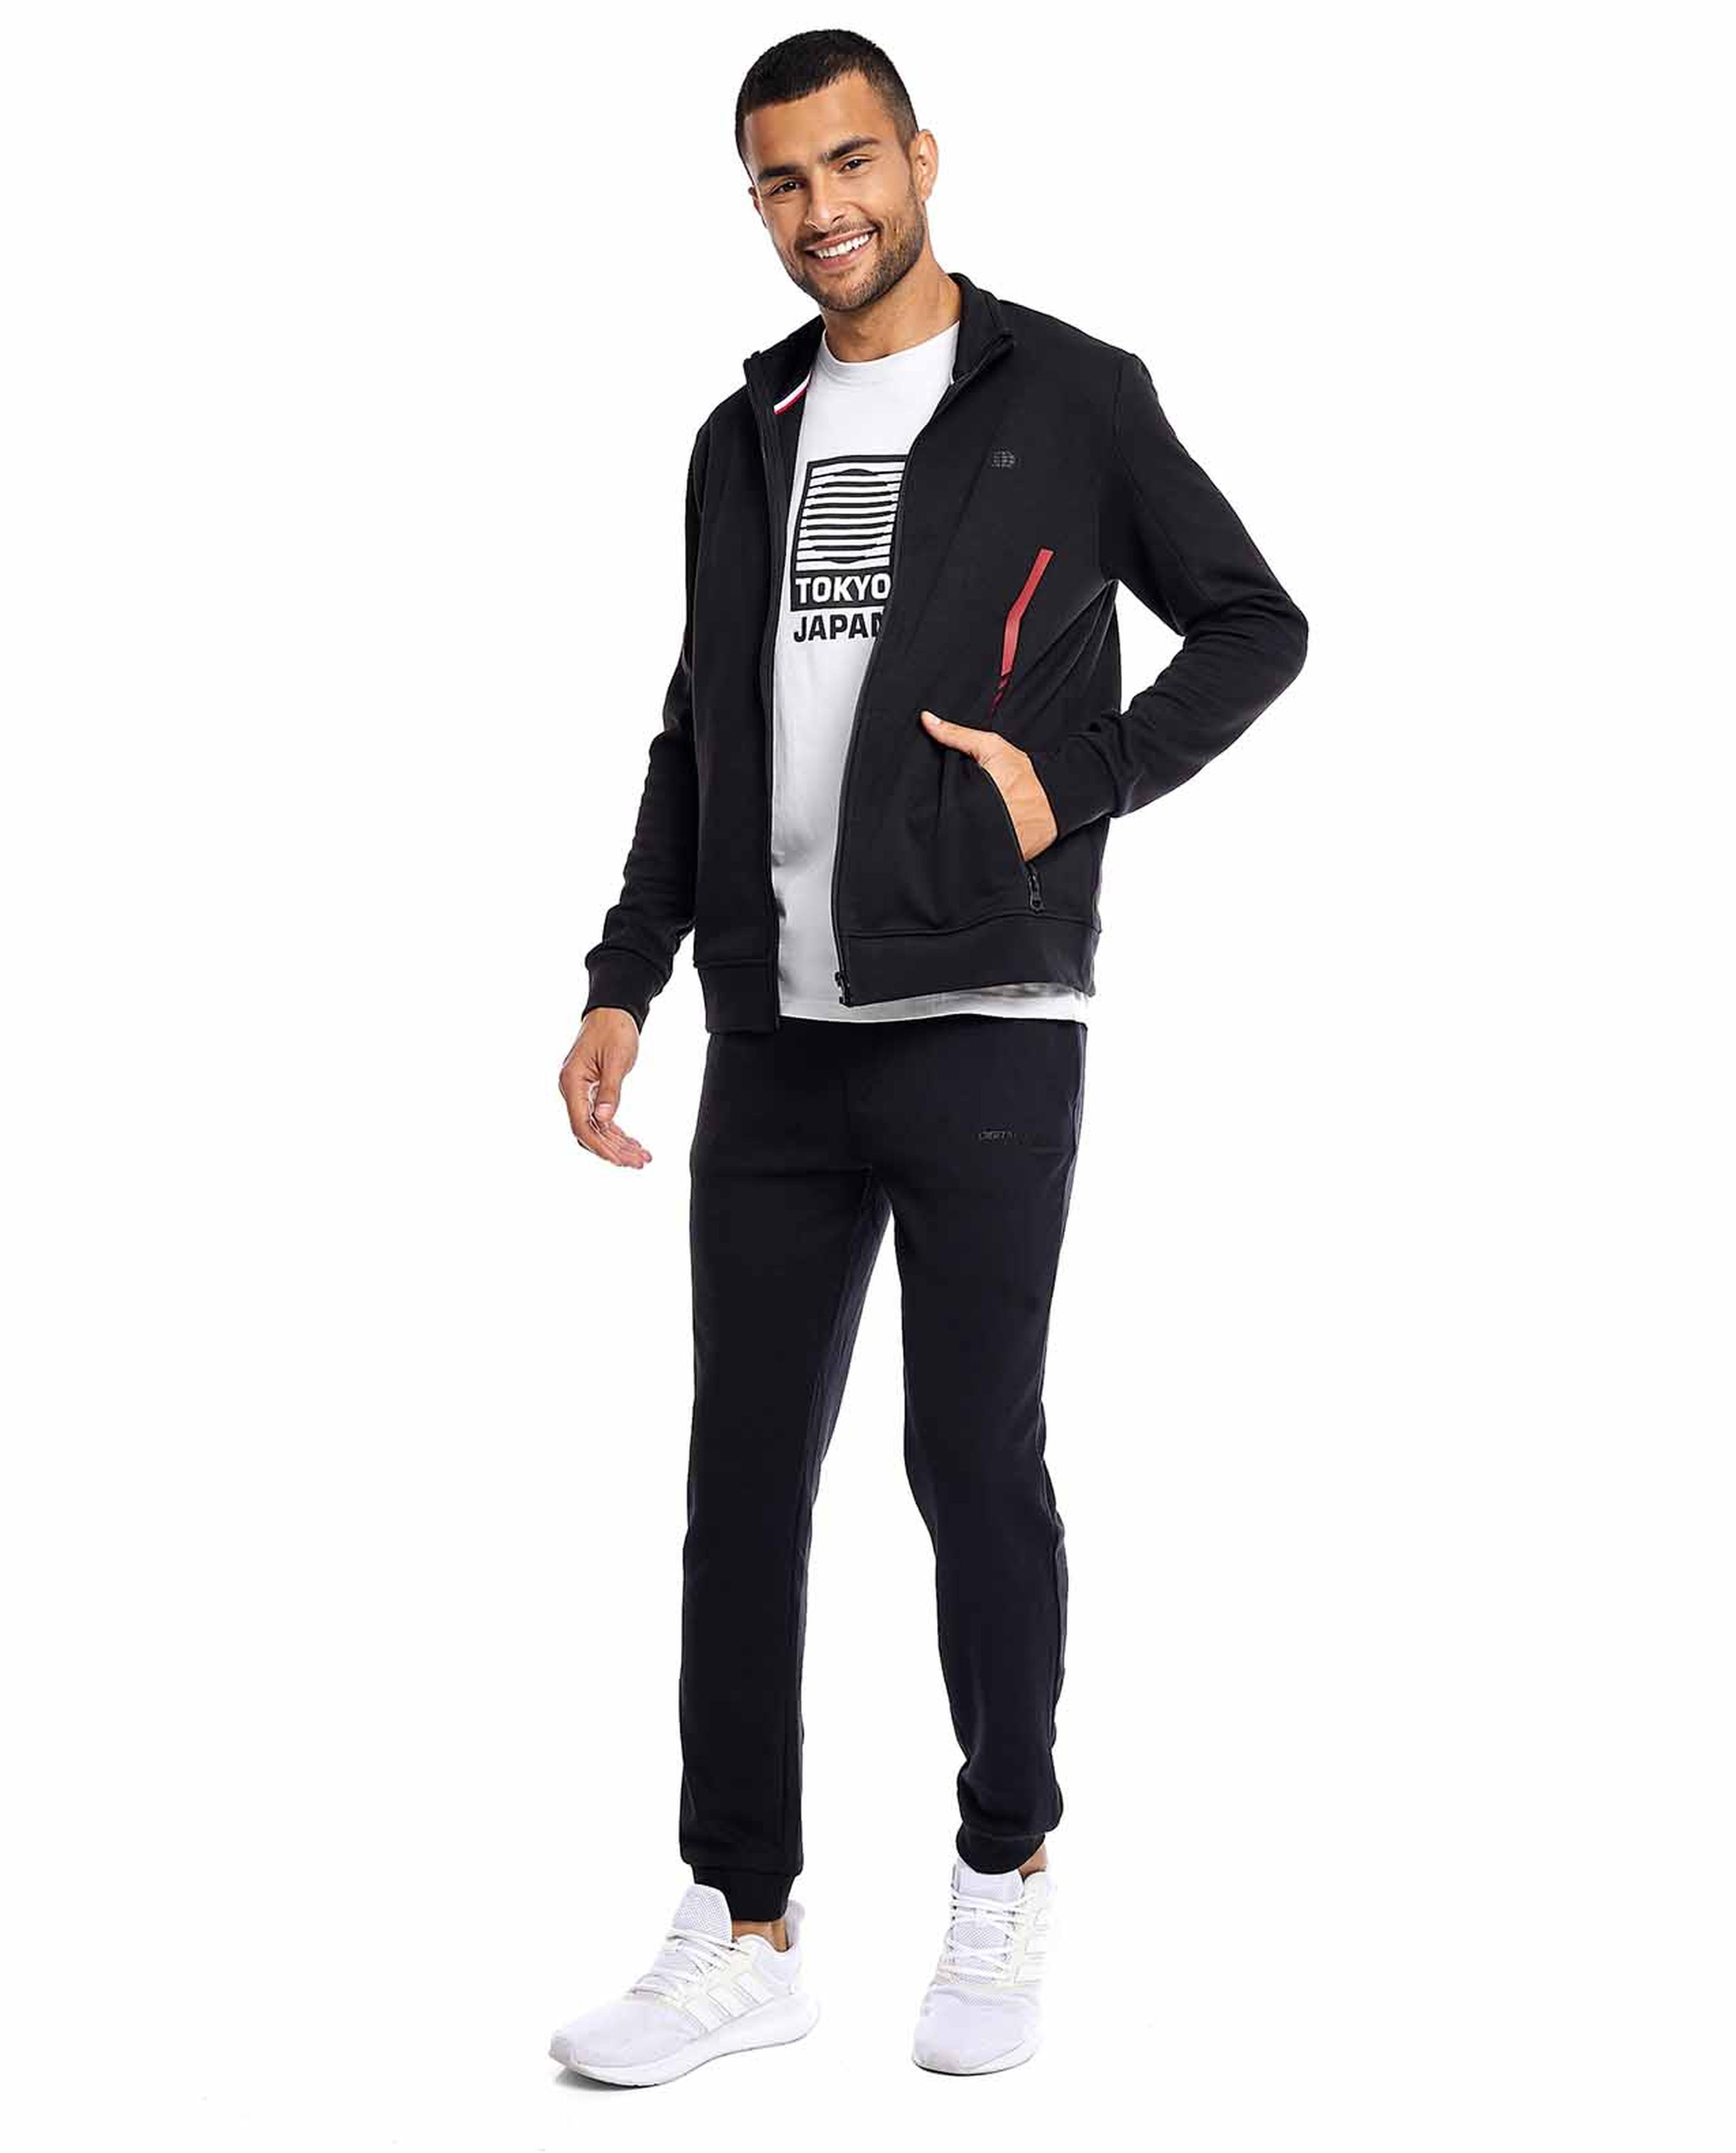 Contrast Detail Track Jacket with Zipper Closure